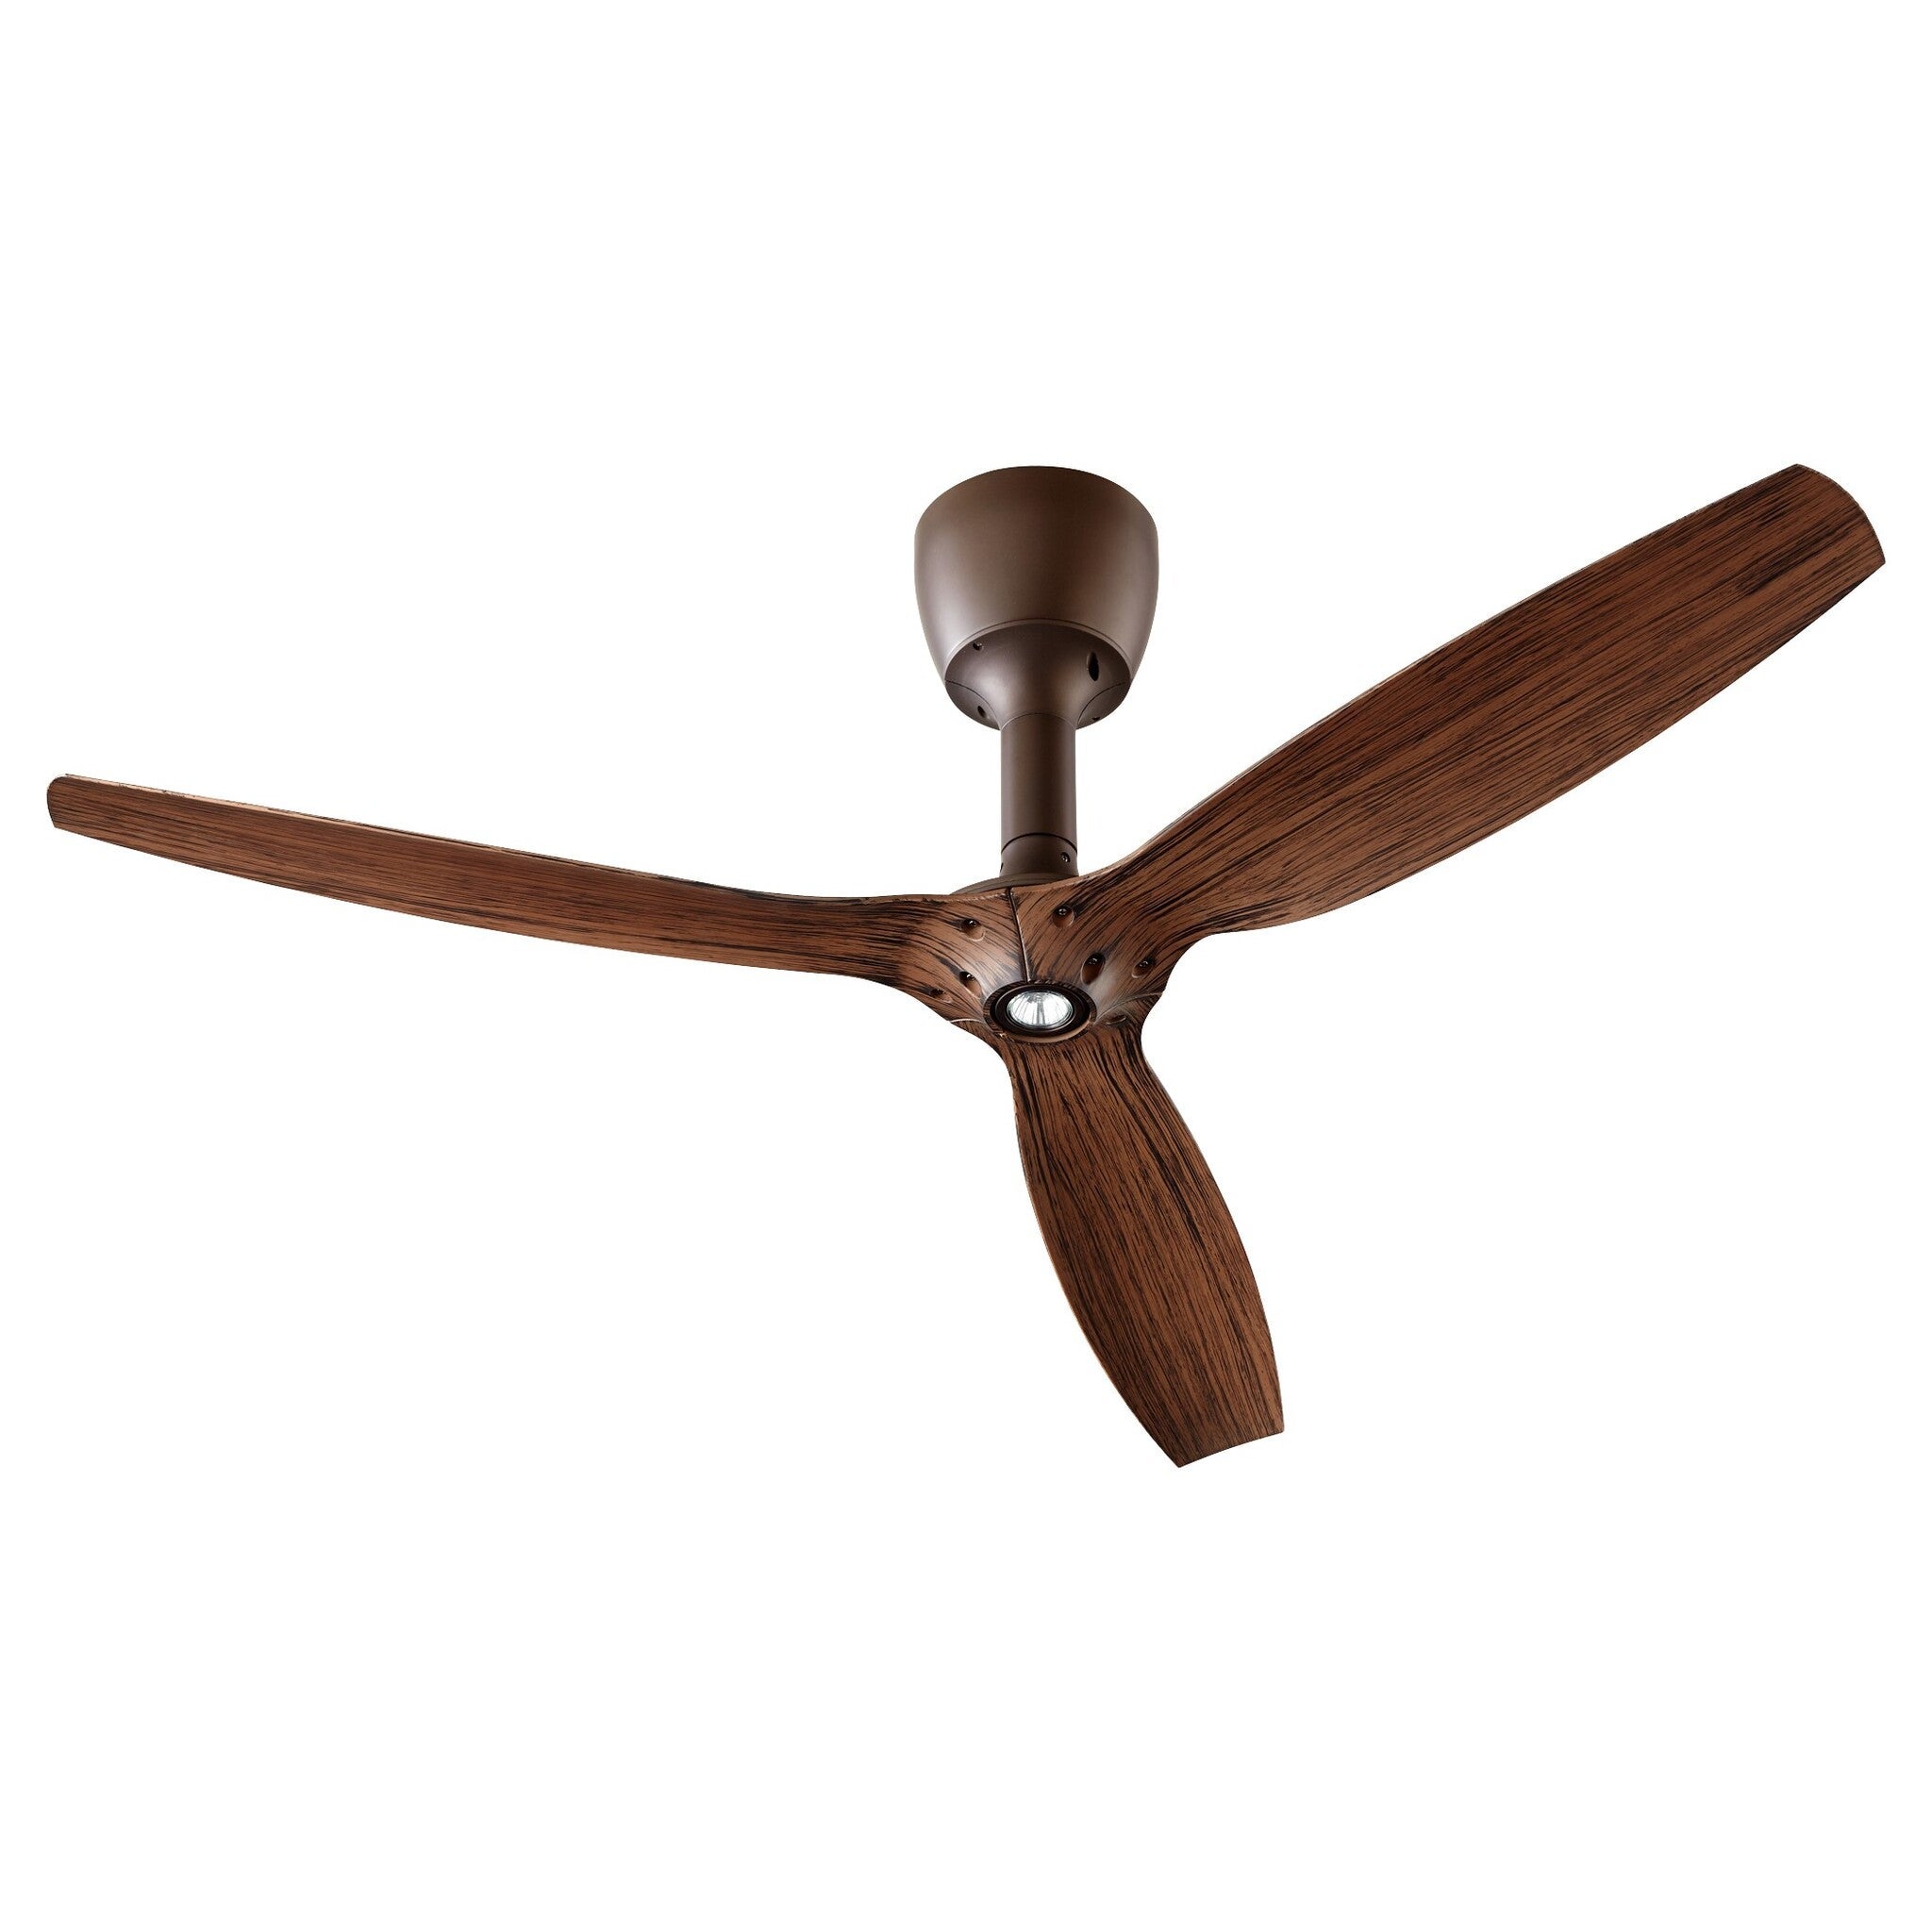 Oxygen ALPHA 3-105-022 60 Inch Ceiling Fan Motor with LED Light - Oiled Bronze (Order Blades Separately)